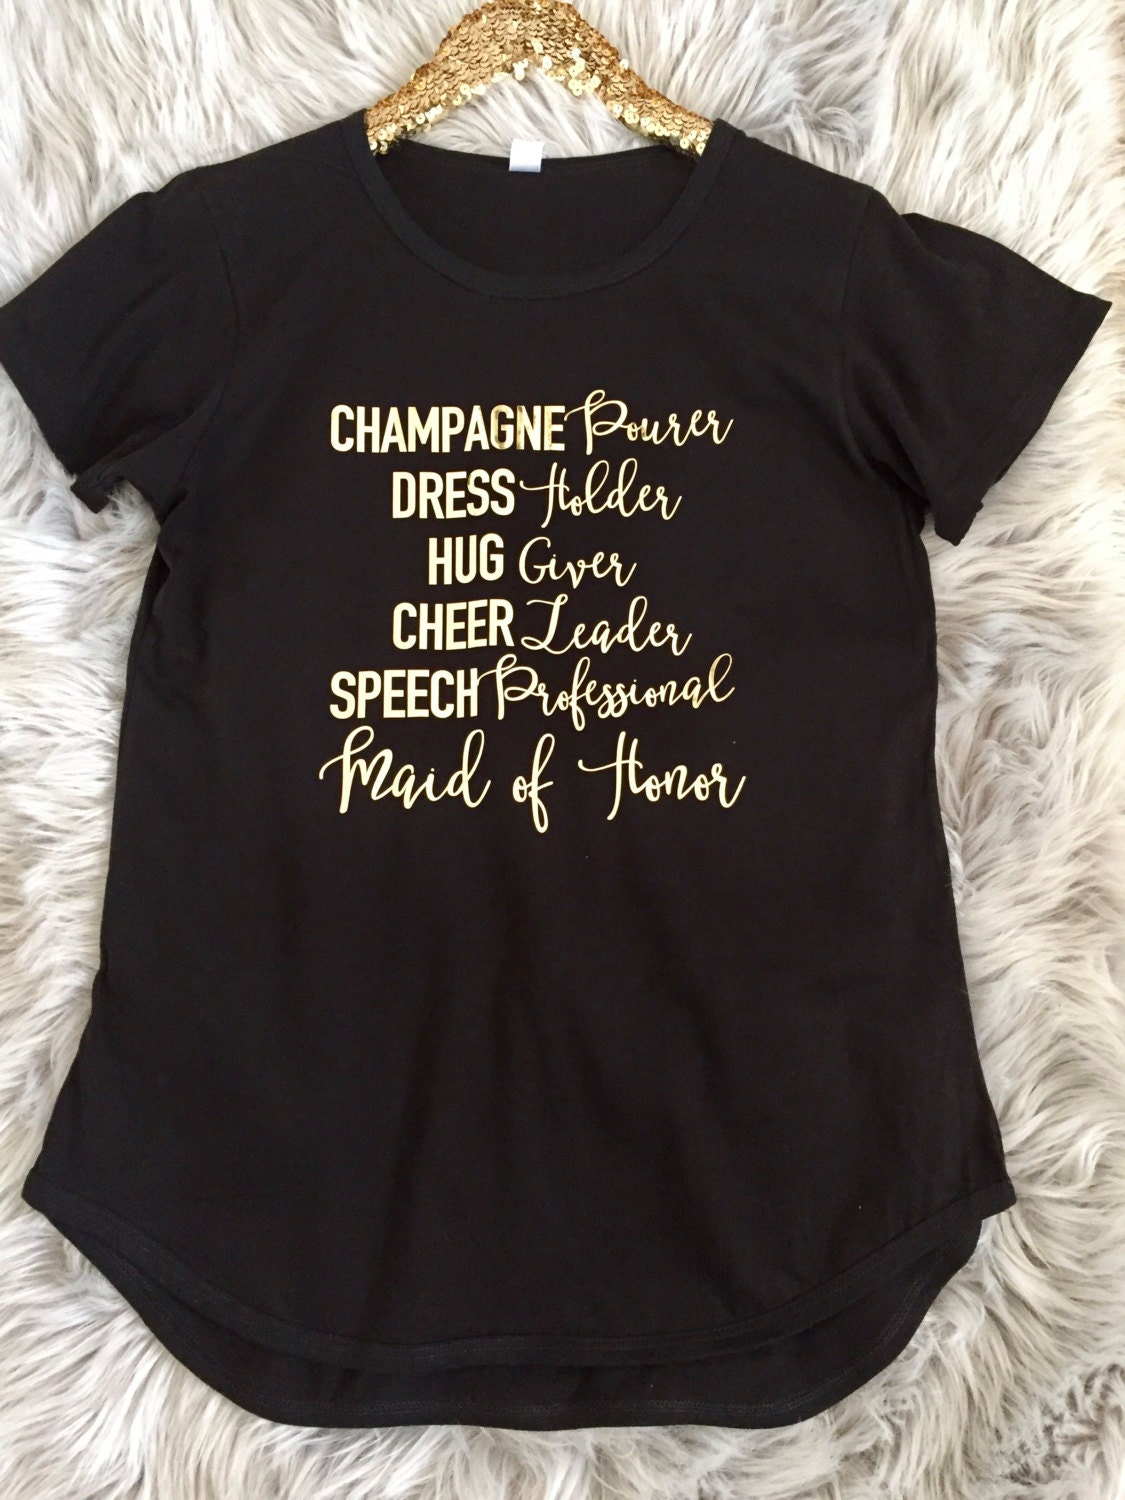 Champagne Campaign Tunic T-shirt with Gold Foil // Bride Shirt / Bachelorette / Gift for her / Birthday shirt / Wine Lover /Rose Merlot 3011